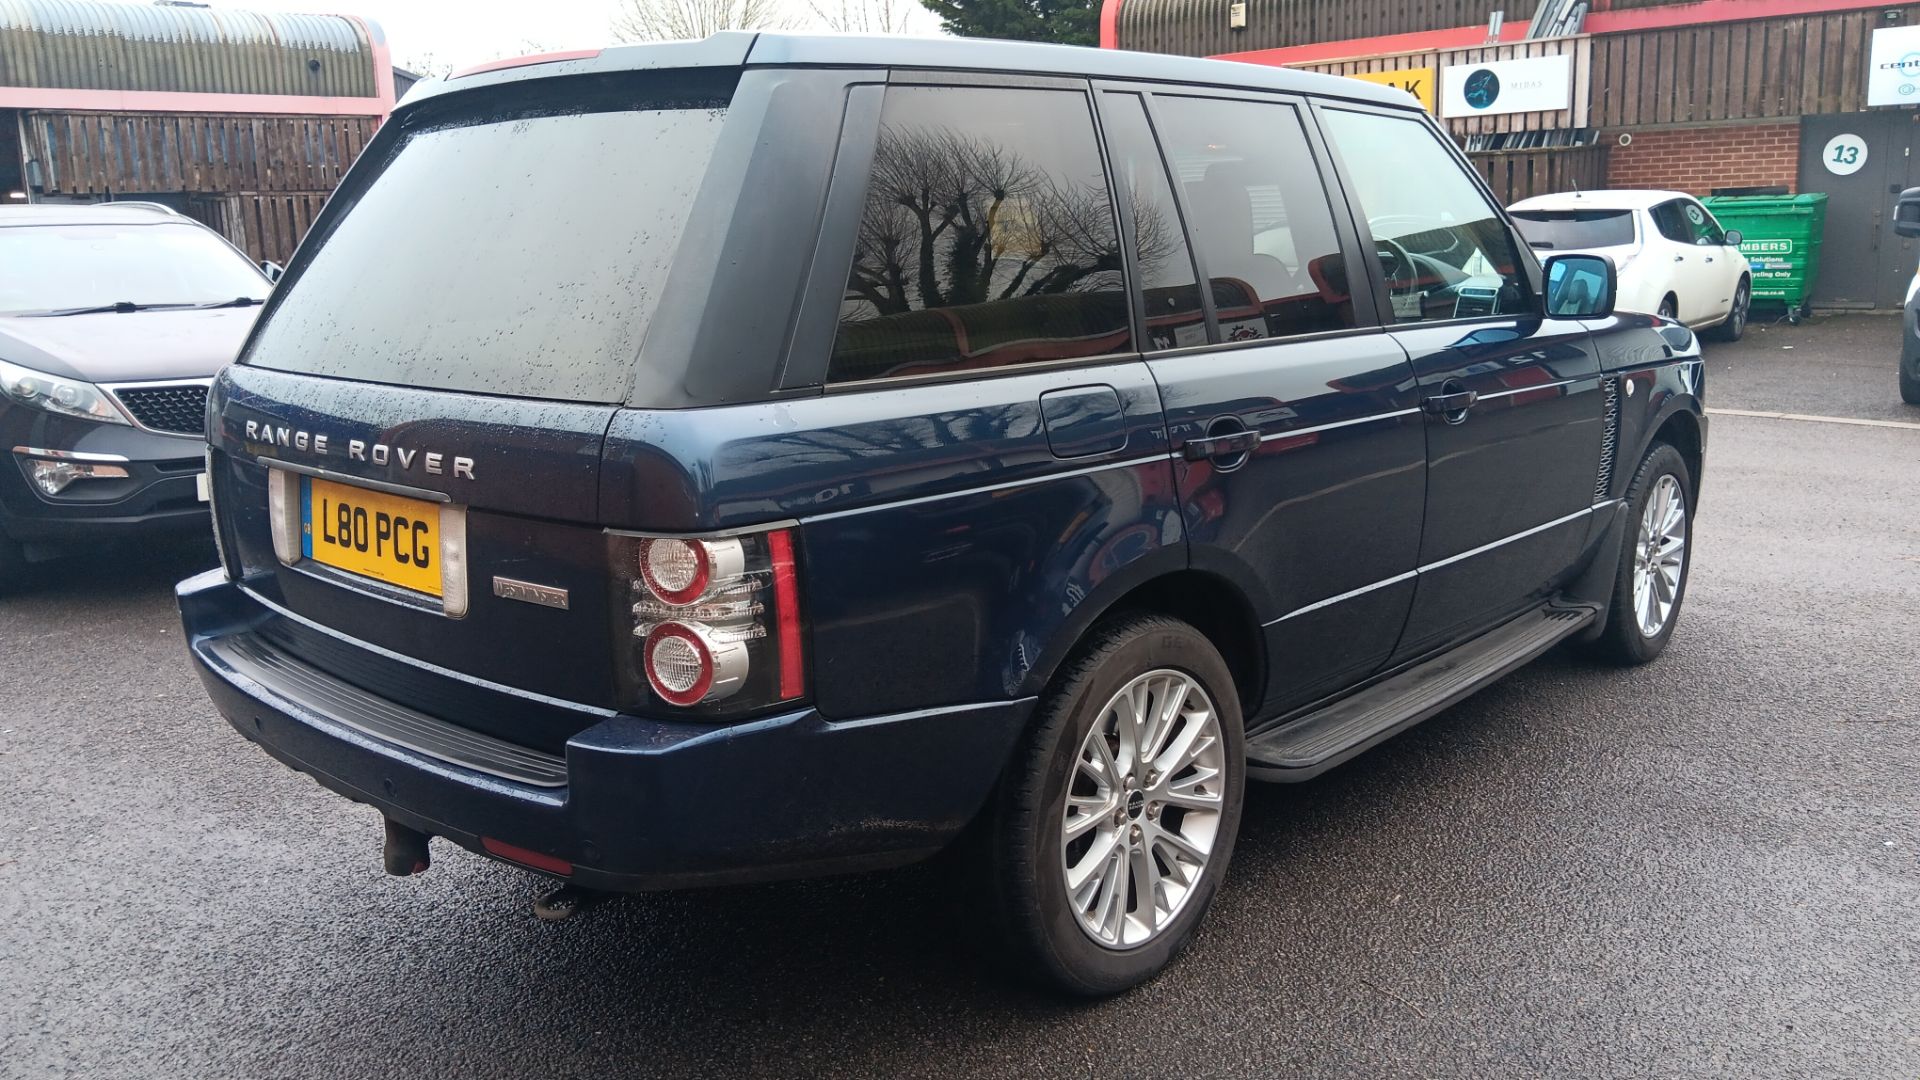 Land Rover Range Rover Special Editions 4.4 TDV8 Westminster 4dr 8 speed Auto, Registration L80 PCG - Image 7 of 28